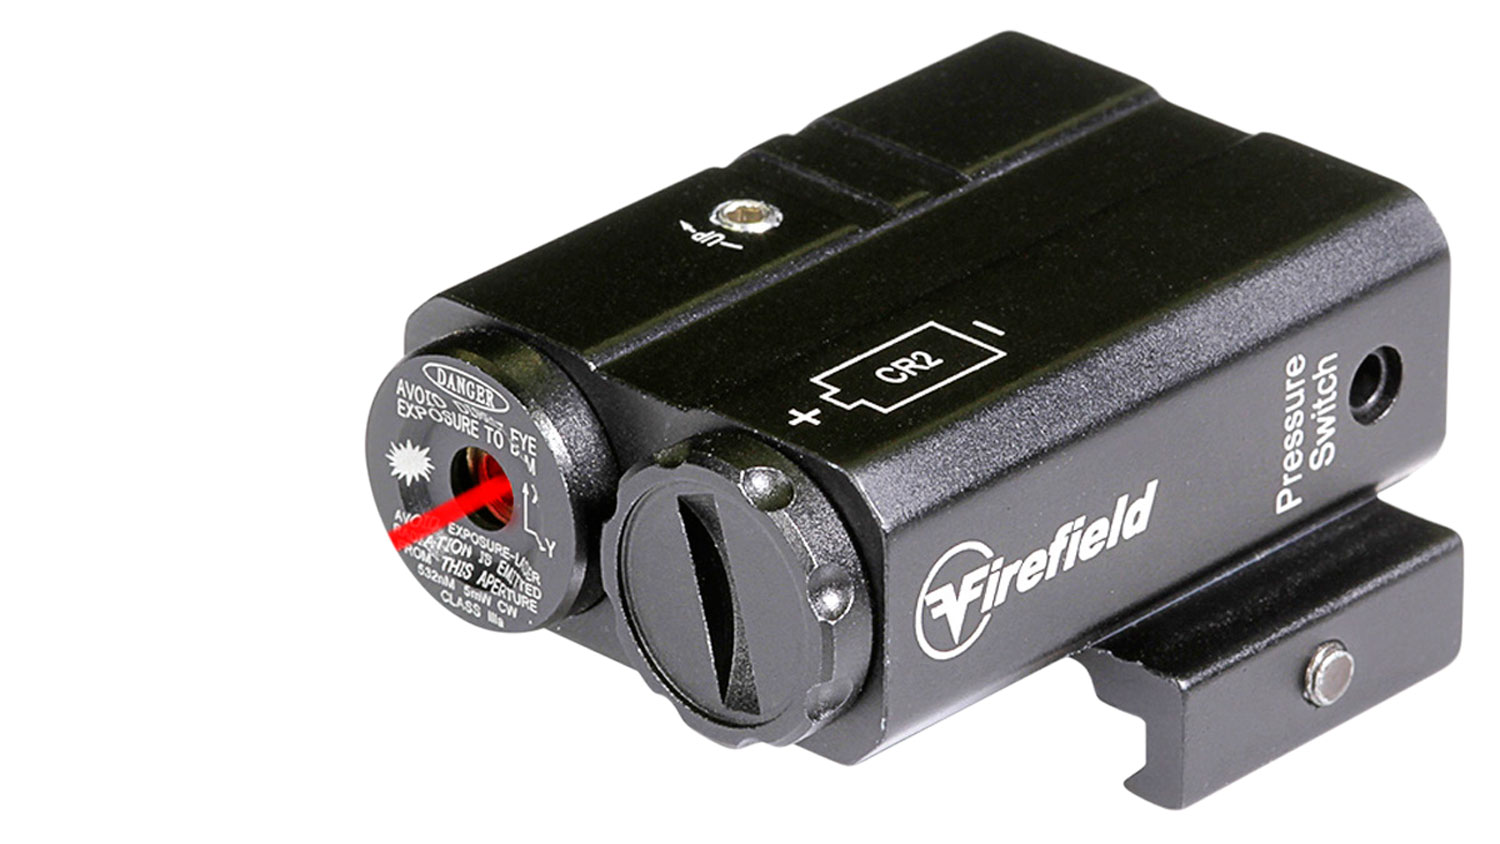 Firefield FF25006 Charge  5mW Red Laser 630-650nM Wavelength (20 yds Day/300 yds Night Range) Matte Black Finish for AR-Platform Includes Pressure Pad & Battery